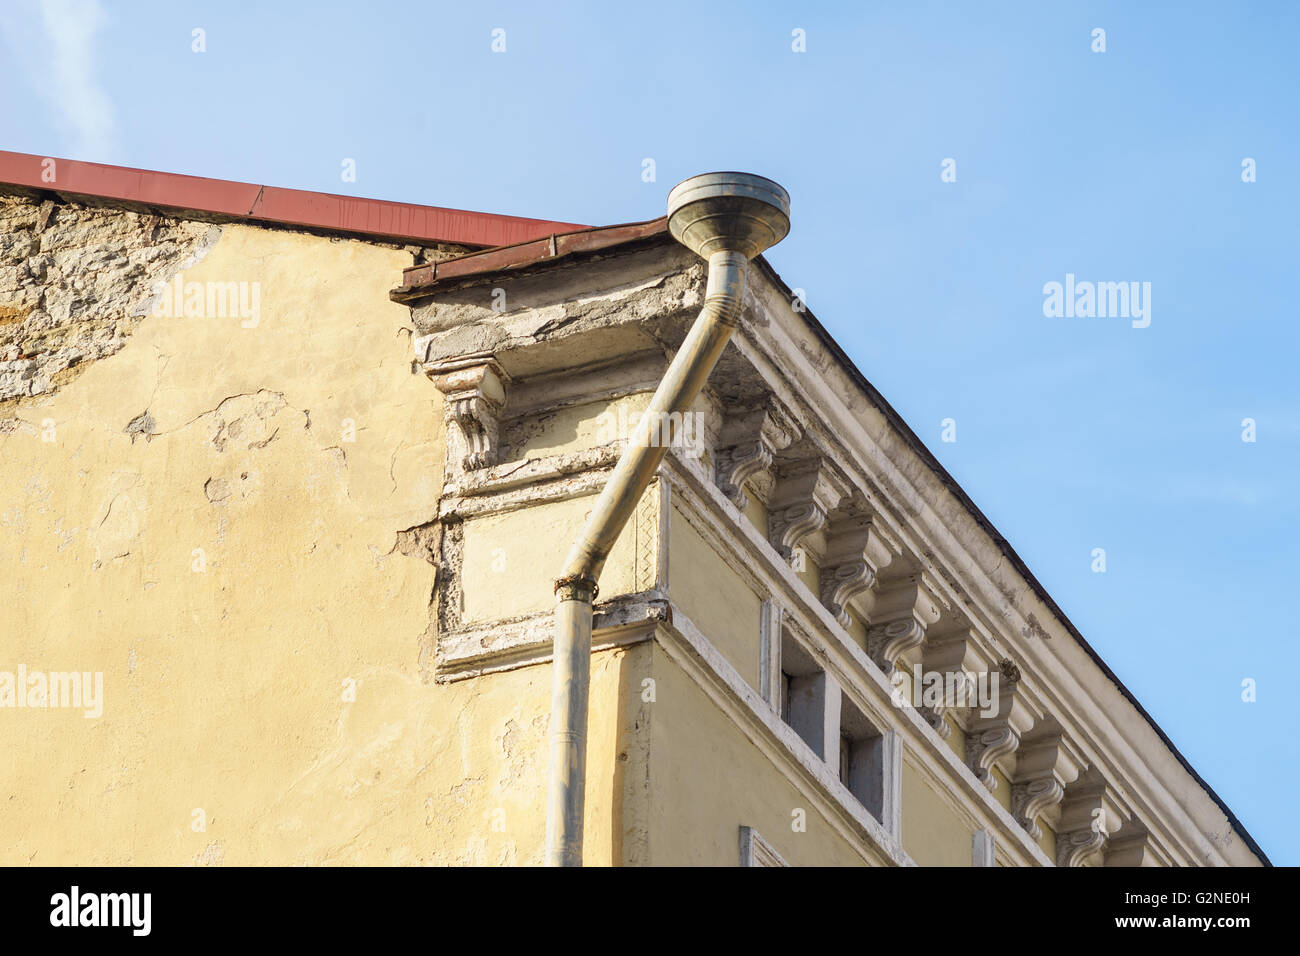 Rain gutter and downspout on corner of old style house Stock Photo